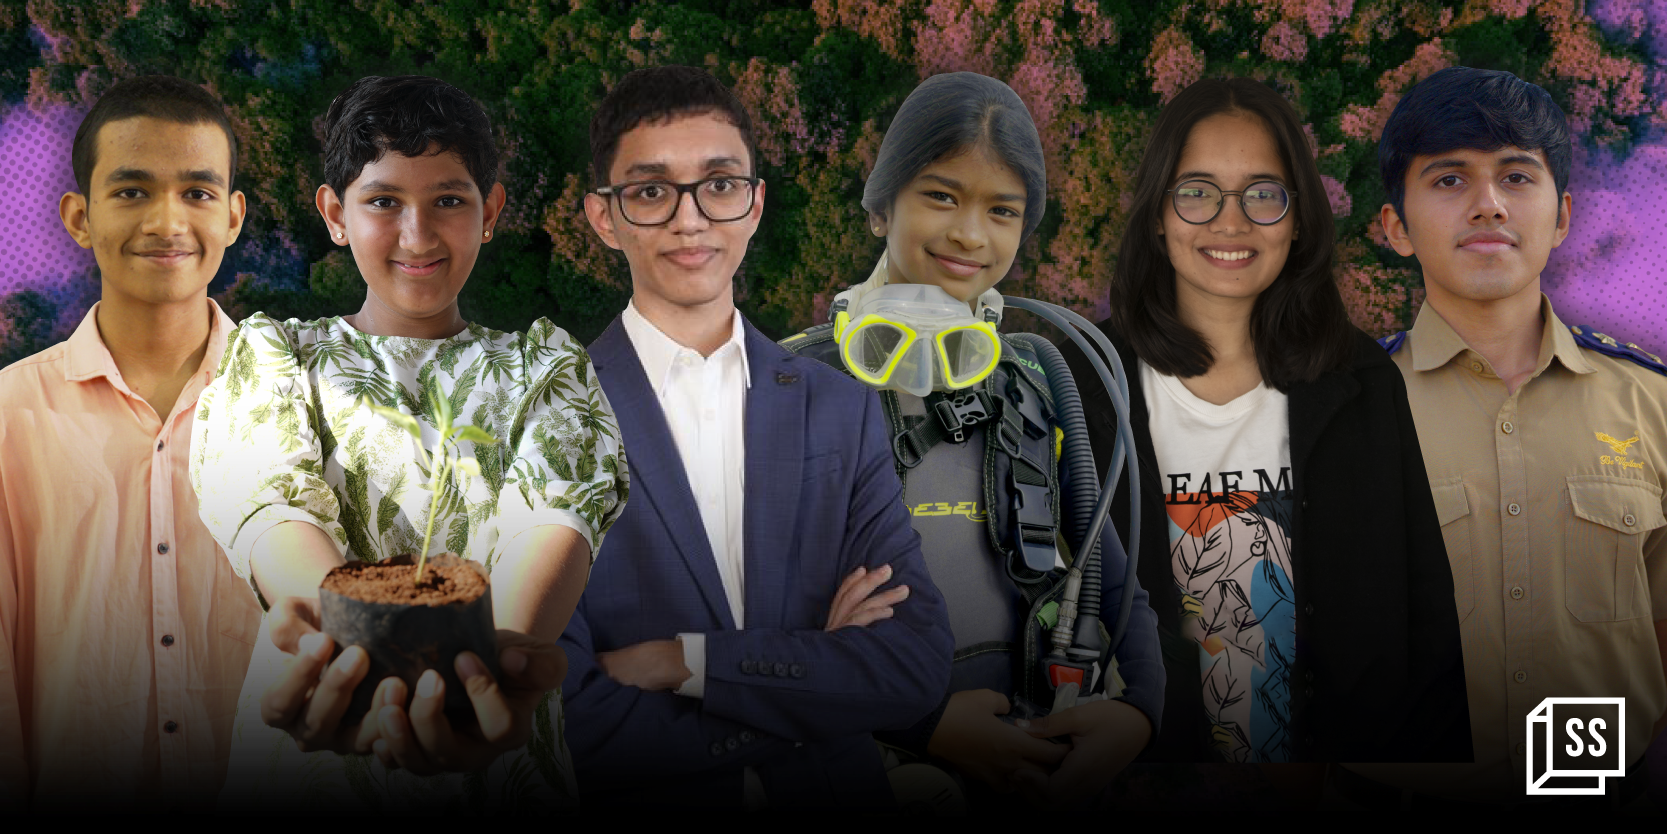 From oceans, forests, to climate change, these young changemakers are helping save the planet

